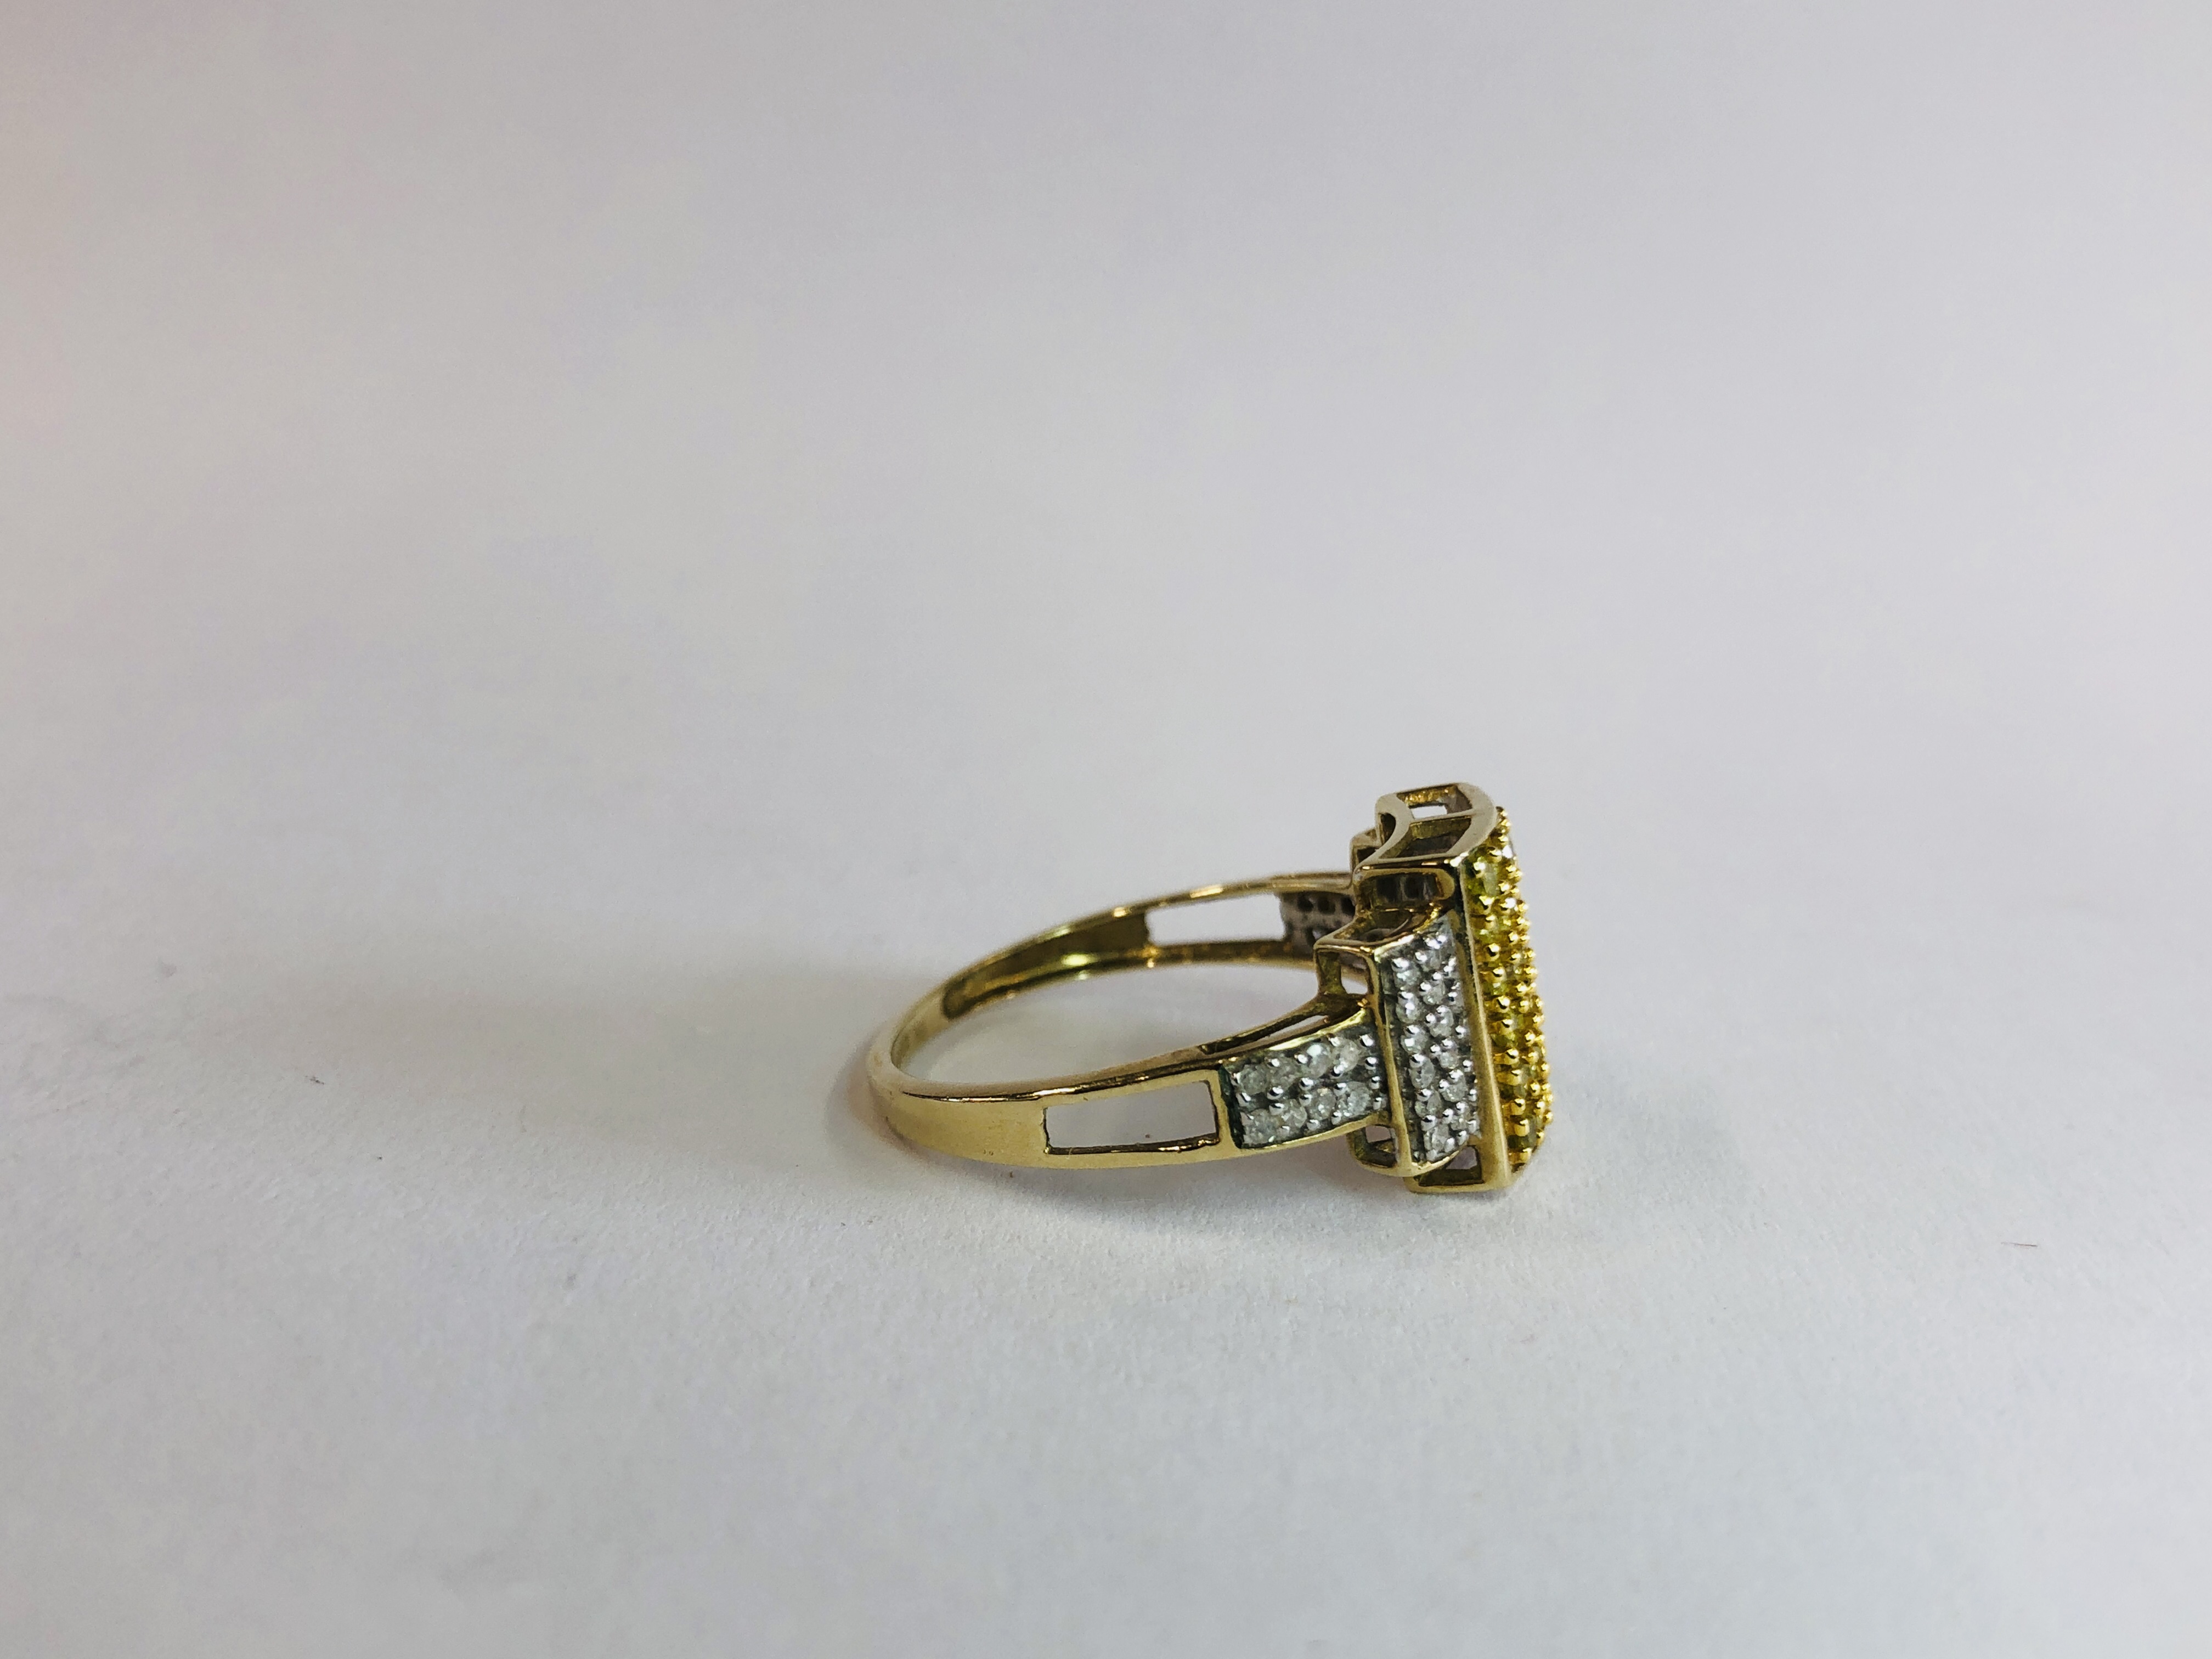 AN UNUSUAL DESIGNER 9CT GOLD RING SET WITH CENTRAL YELLOW DIAMONDS AND WHITE DIAMOND SHOULDERS. - Image 4 of 9